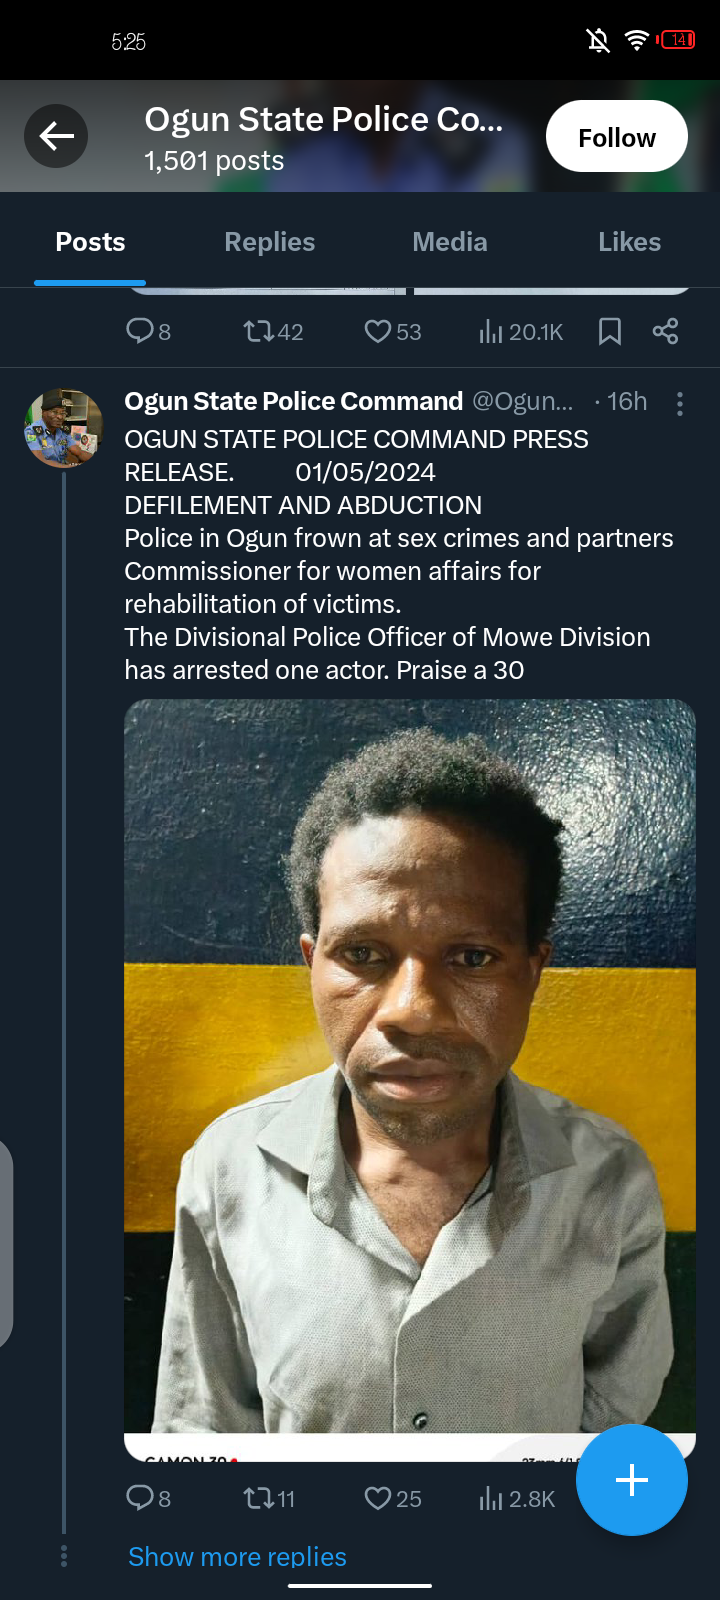 Ogun Police Nab Actor For Alleged Abduction, Defilement Of 14-Year-Old Girl